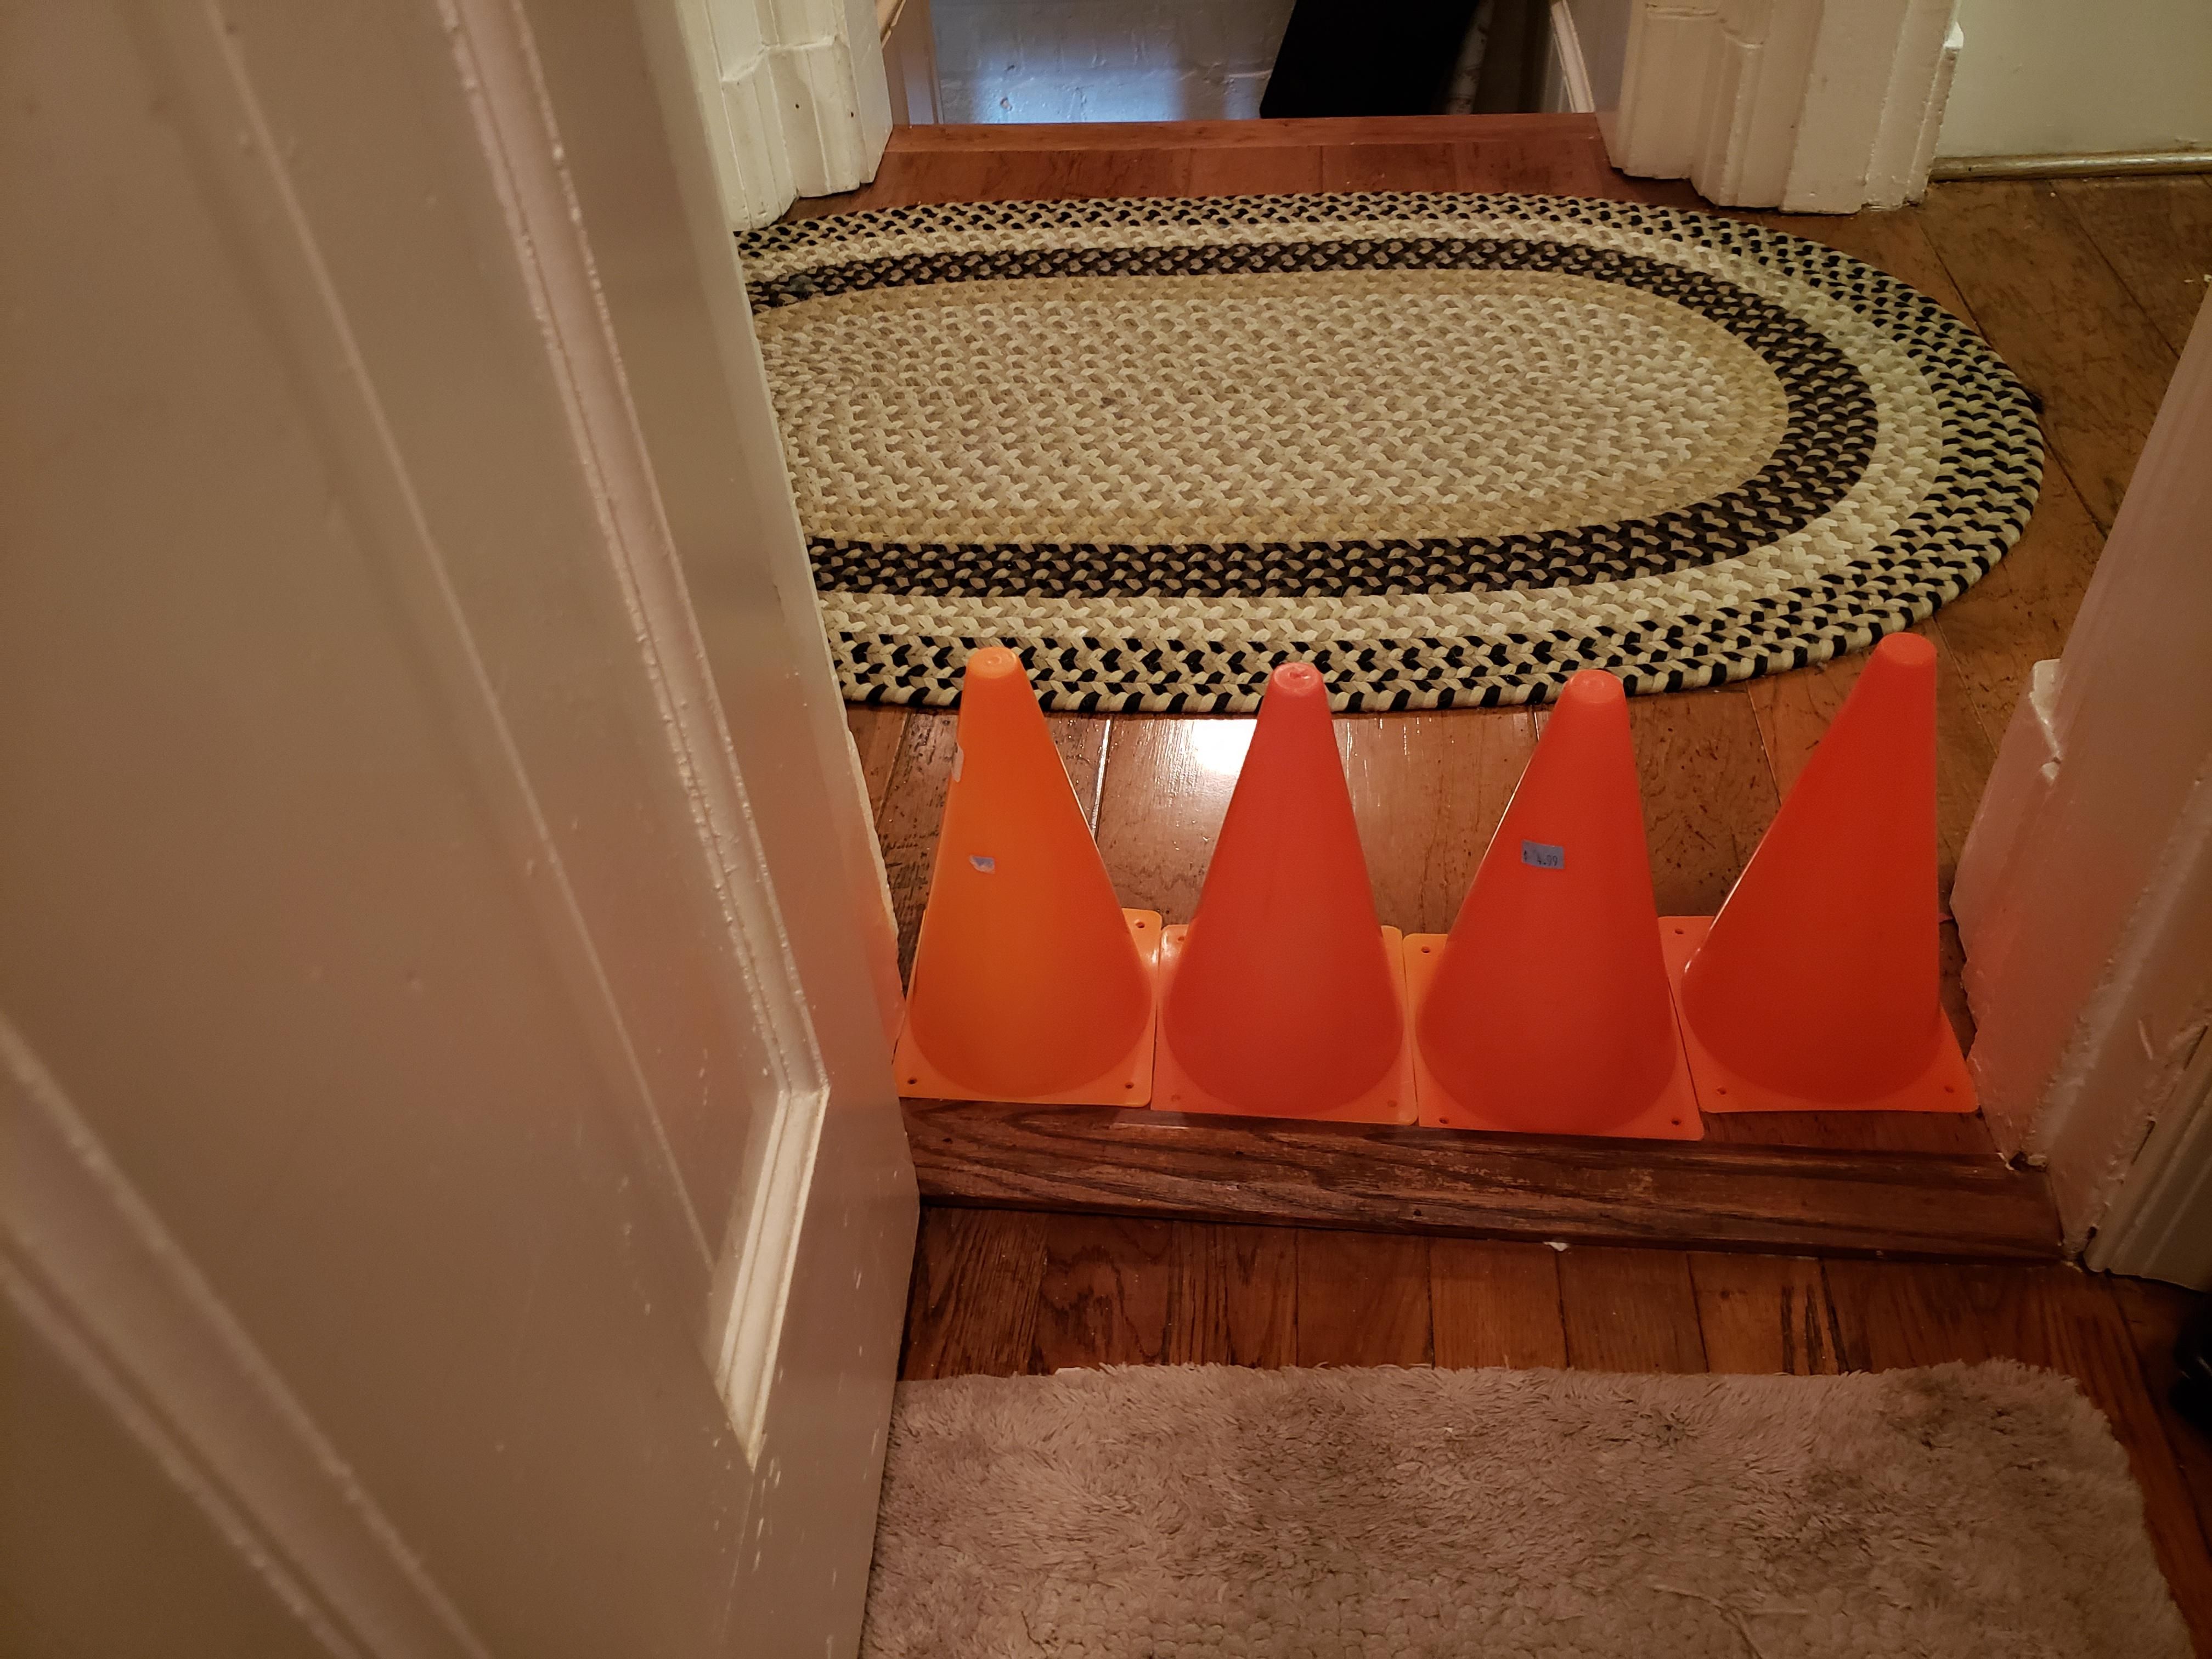 Our 4 year old set this up while I was in the bathroom and then proudly announced that I was trapped.